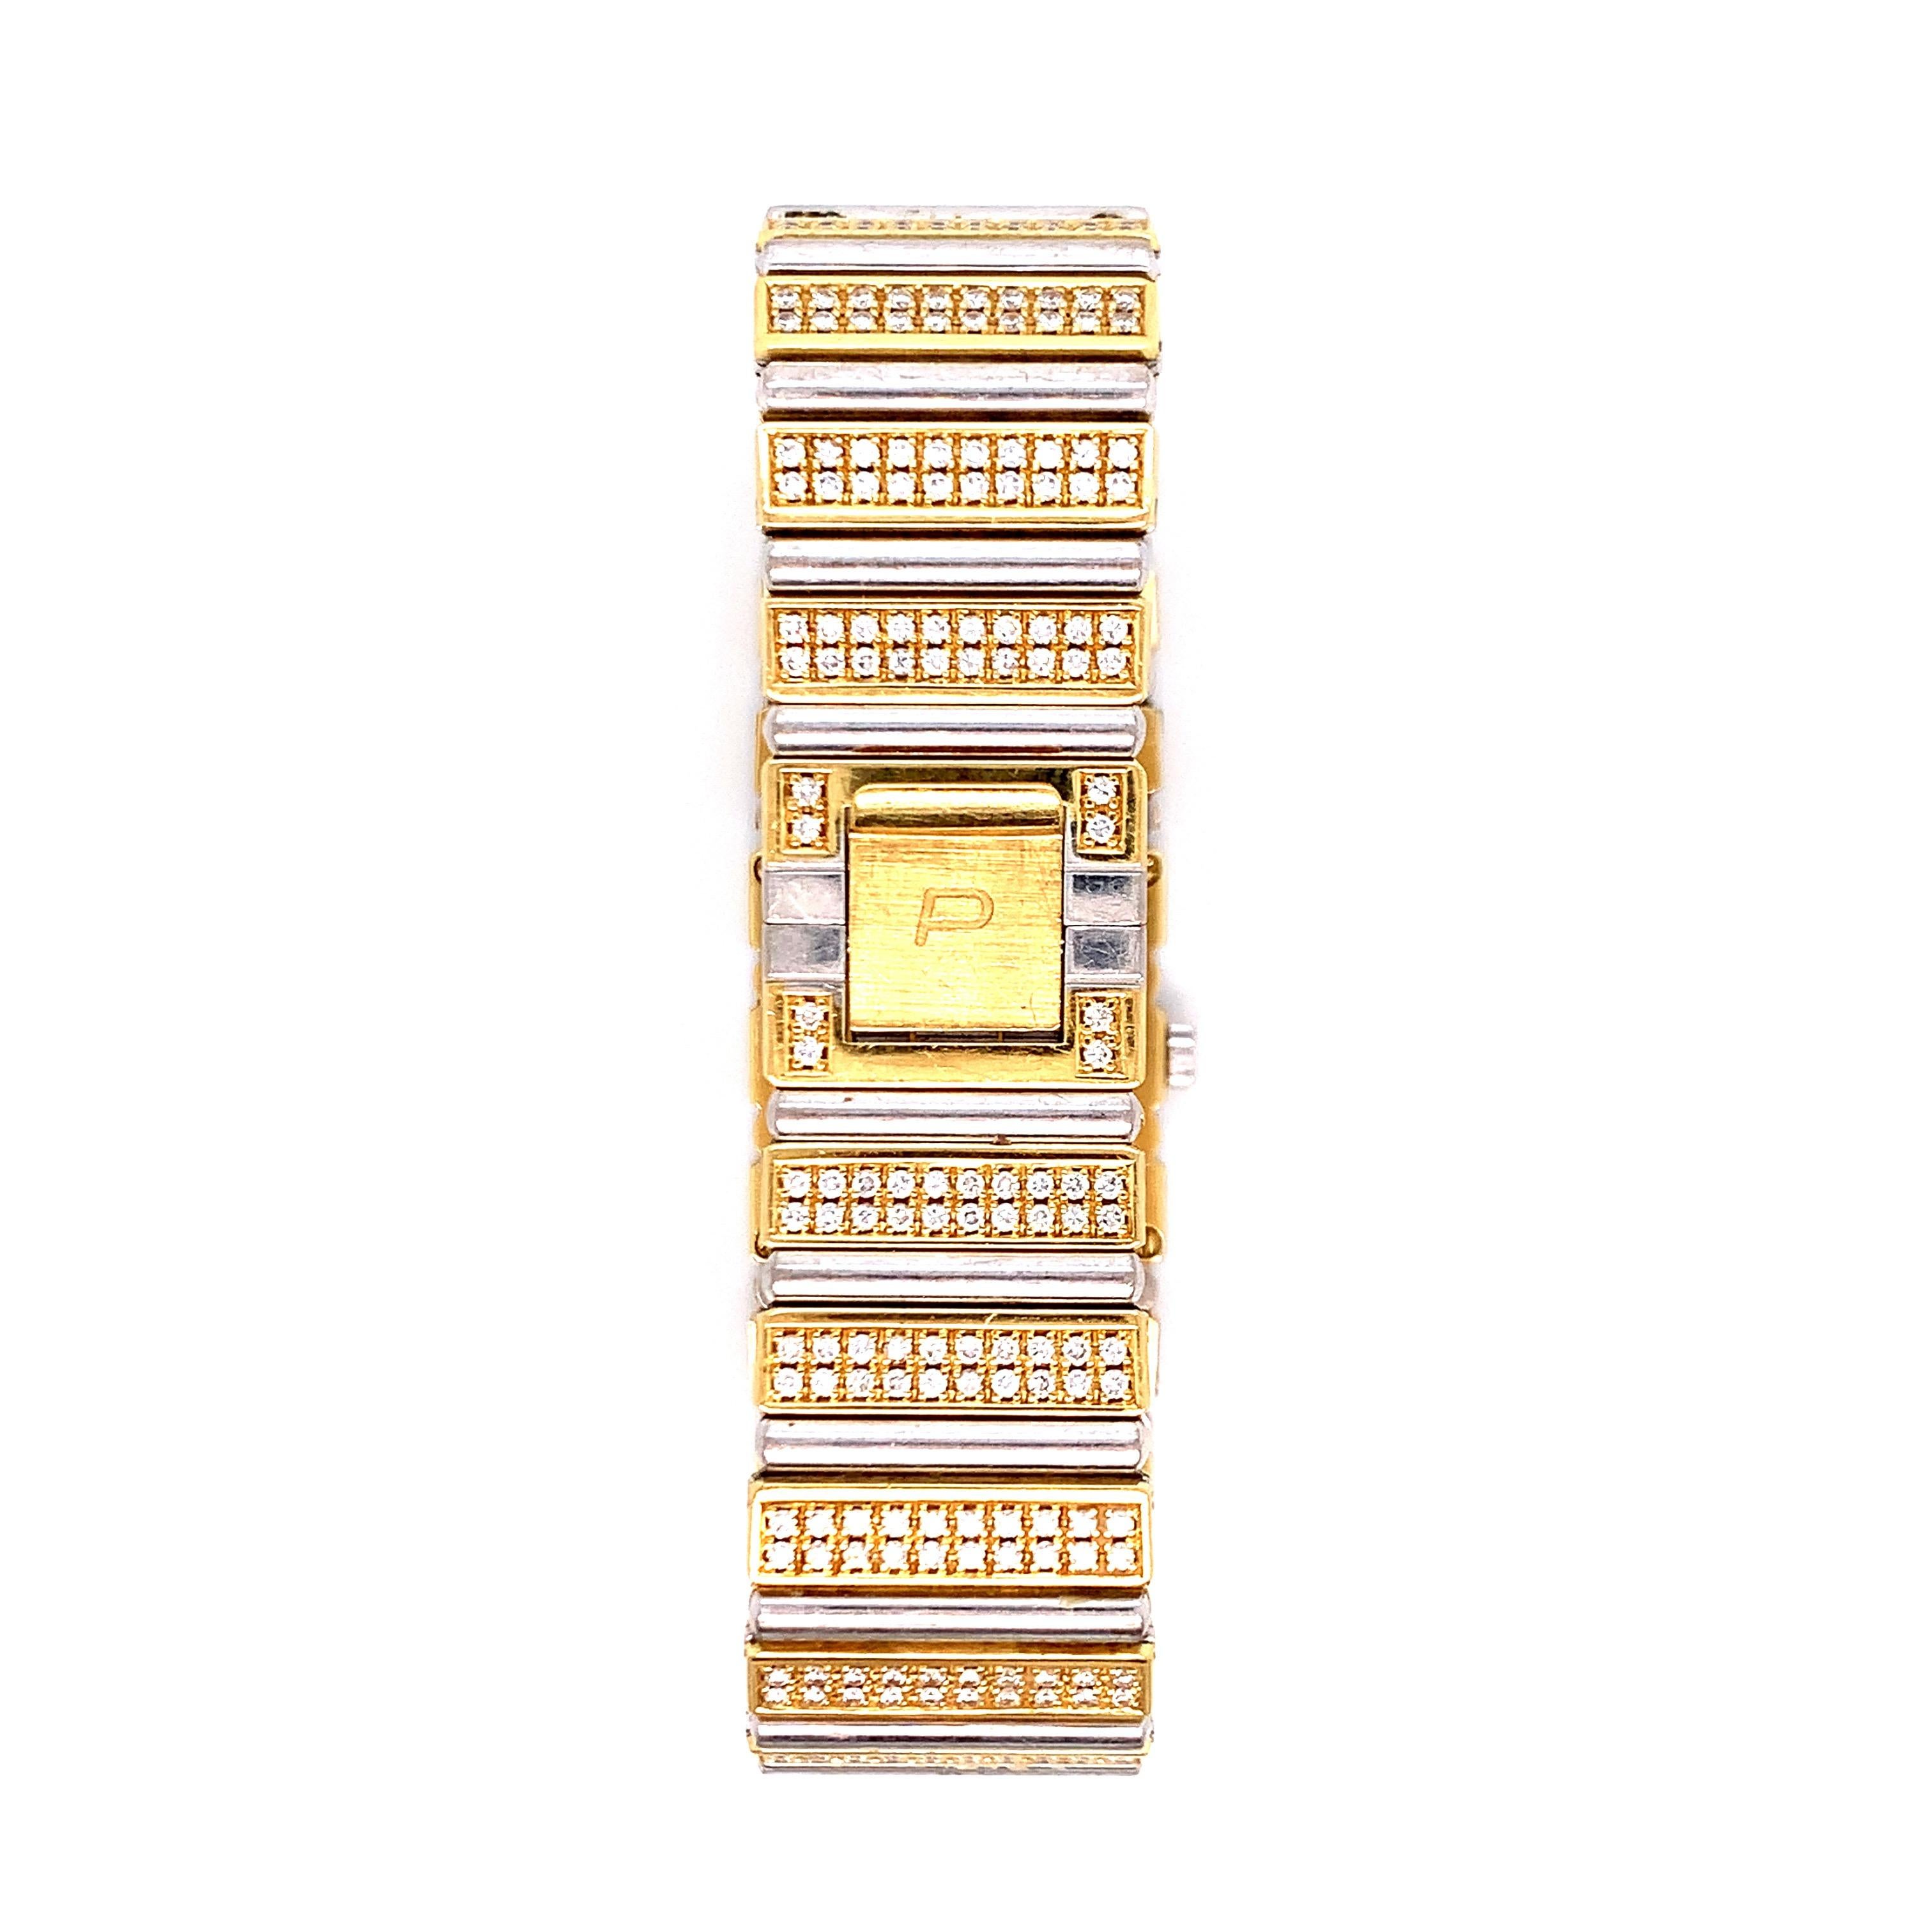 An 18 karat two-tone gold (yellow and white) diamond Piaget 'Polo' wrist watch. The diamonds weigh approximately 6 carats and are present throughout the whole watch, including in the square dial, which has black enamel. The movement is quartz.